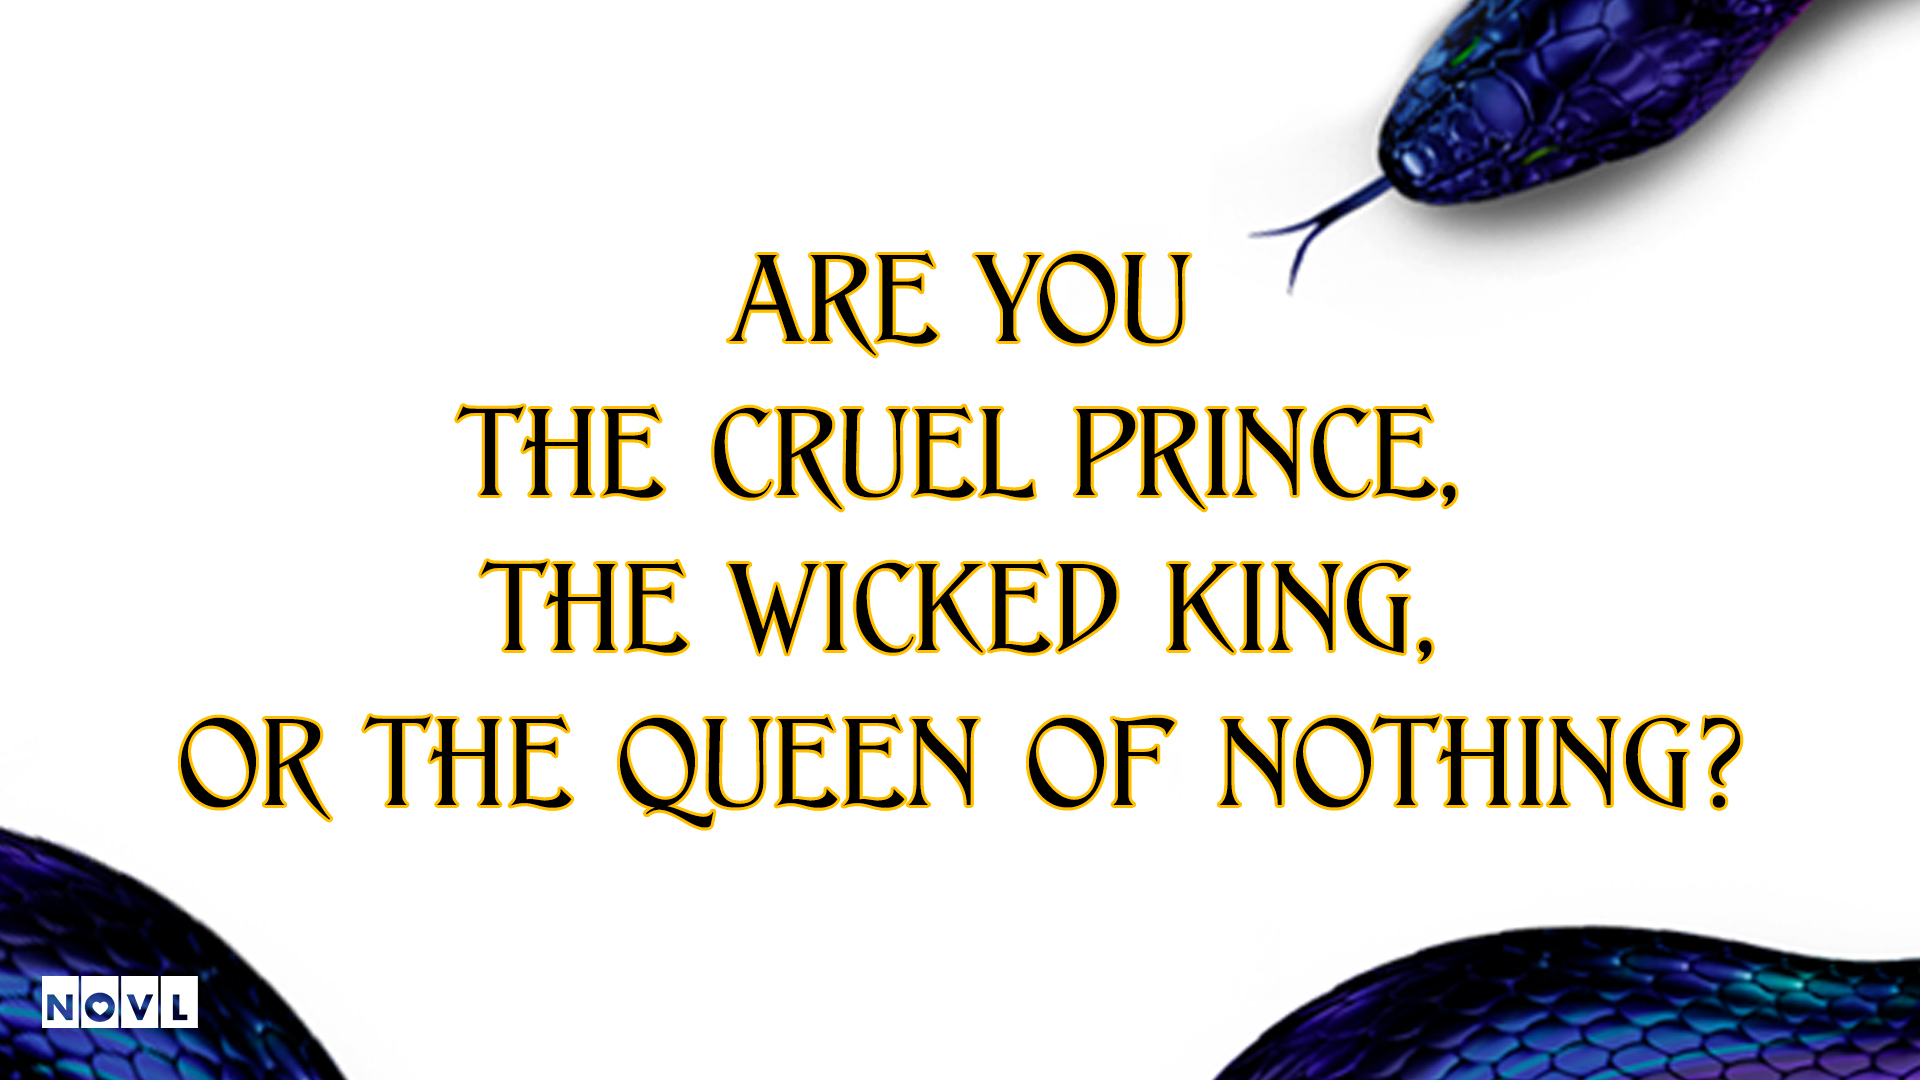 The NOVL Blog, Featured Image for Article: Are you The Cruel Prince, The Wicked King, or The Queen of Nothing?